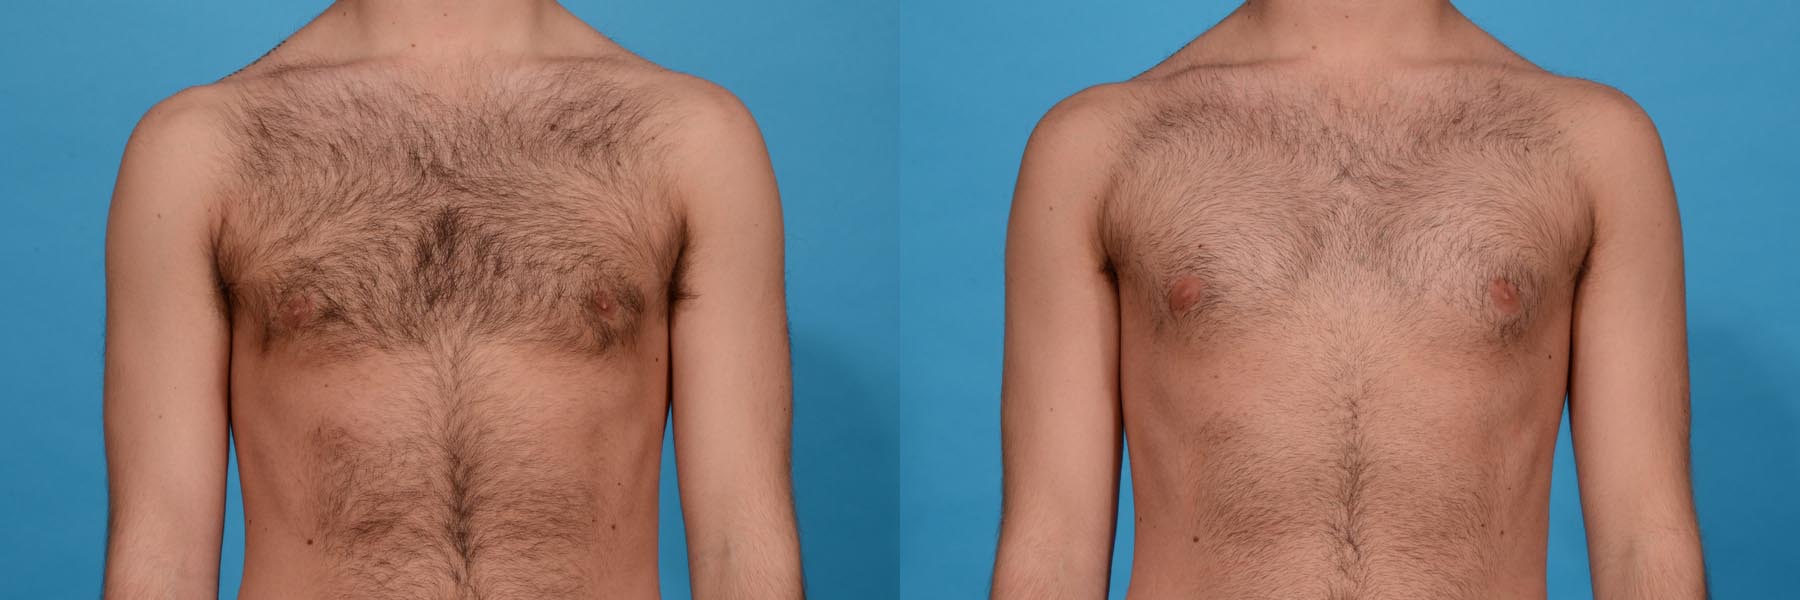 Chest Contouring with Pectoral Augmentation Before and After Photo by Sculpt Aesthetic Center in Frisco, TX